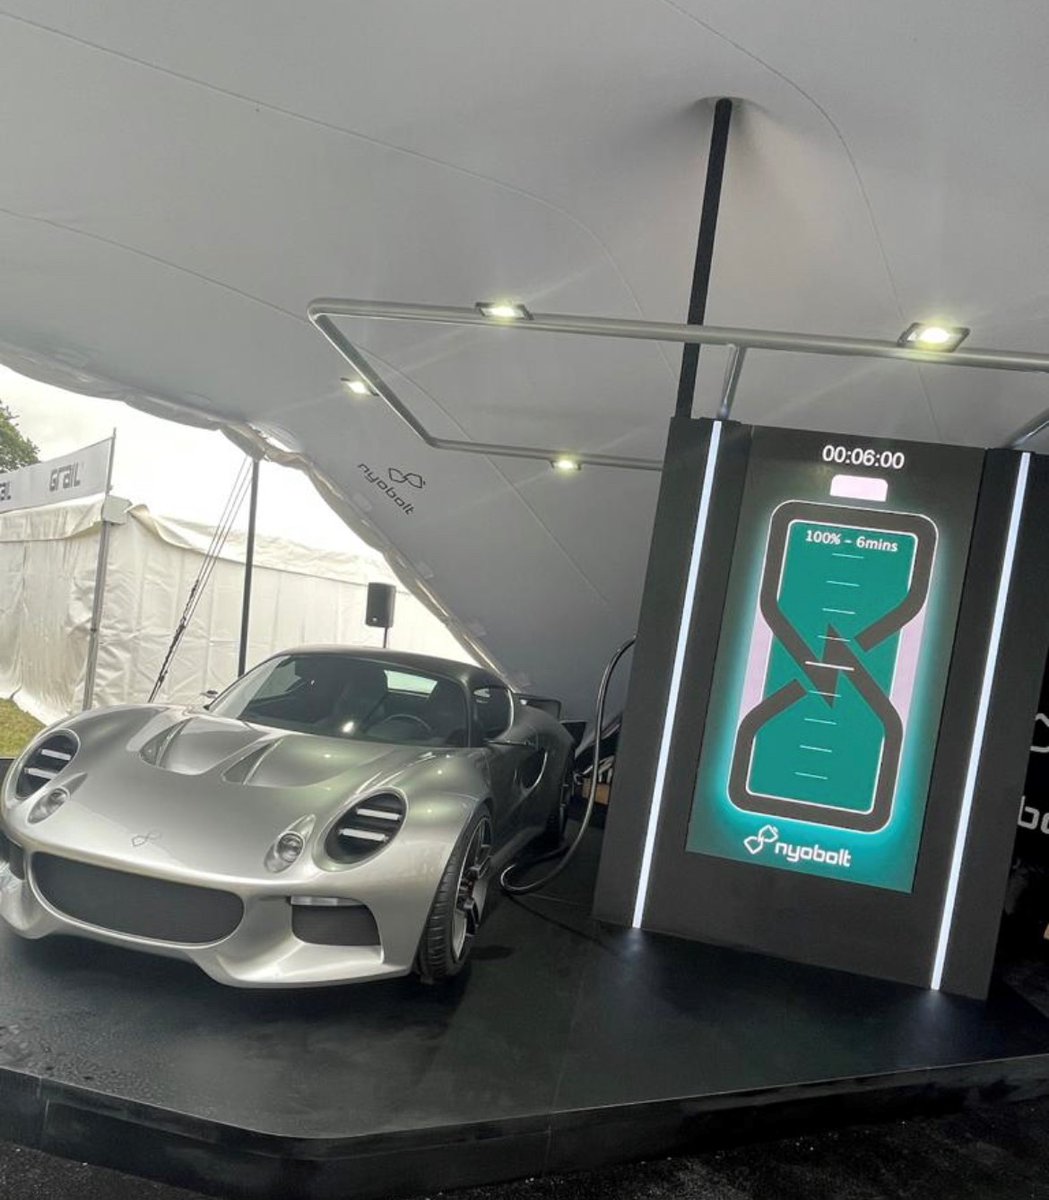 Day two @Goodwood #festivalofspeed. Thank you all for visiting us yesterday, we had some great discussions around Nyobolt’s unique technology and how it gives batteries ultra fast charging times of 6 minutes with more power. #GoodwoodFOS #EV #Fastcharging #morepowerlesstime